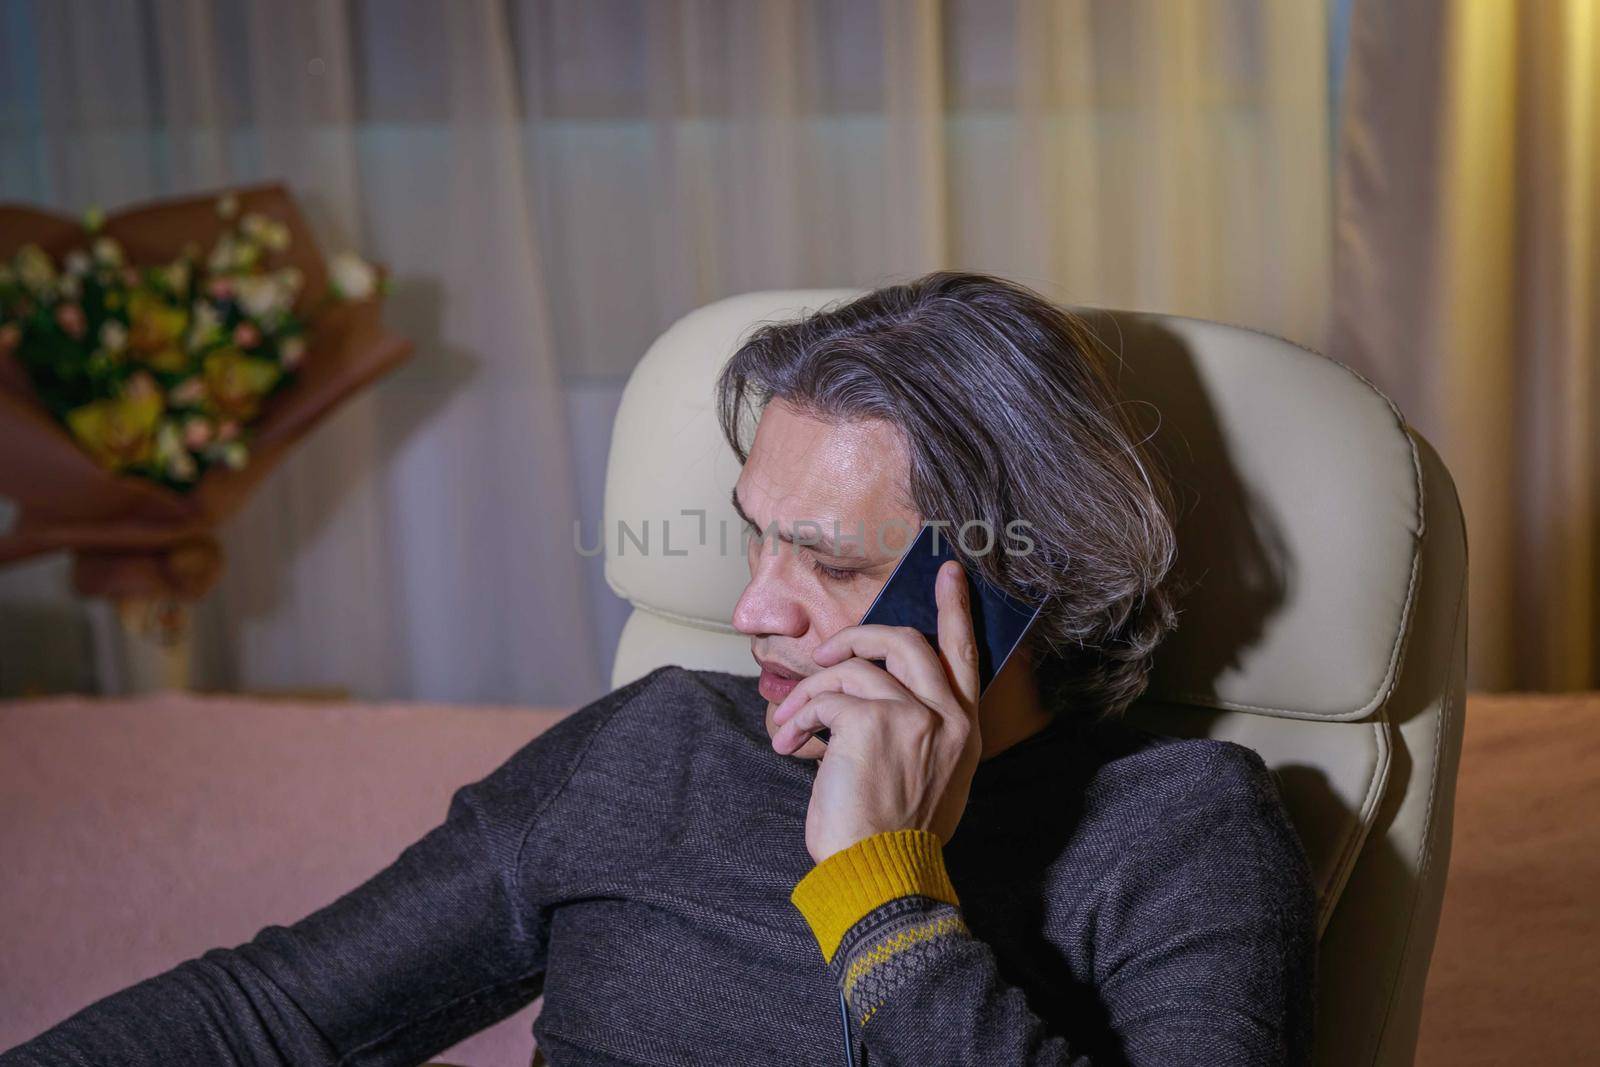 A 50-year-old man with long hair speaks on the phone at home, sitting in a chair. Relaxing delight.